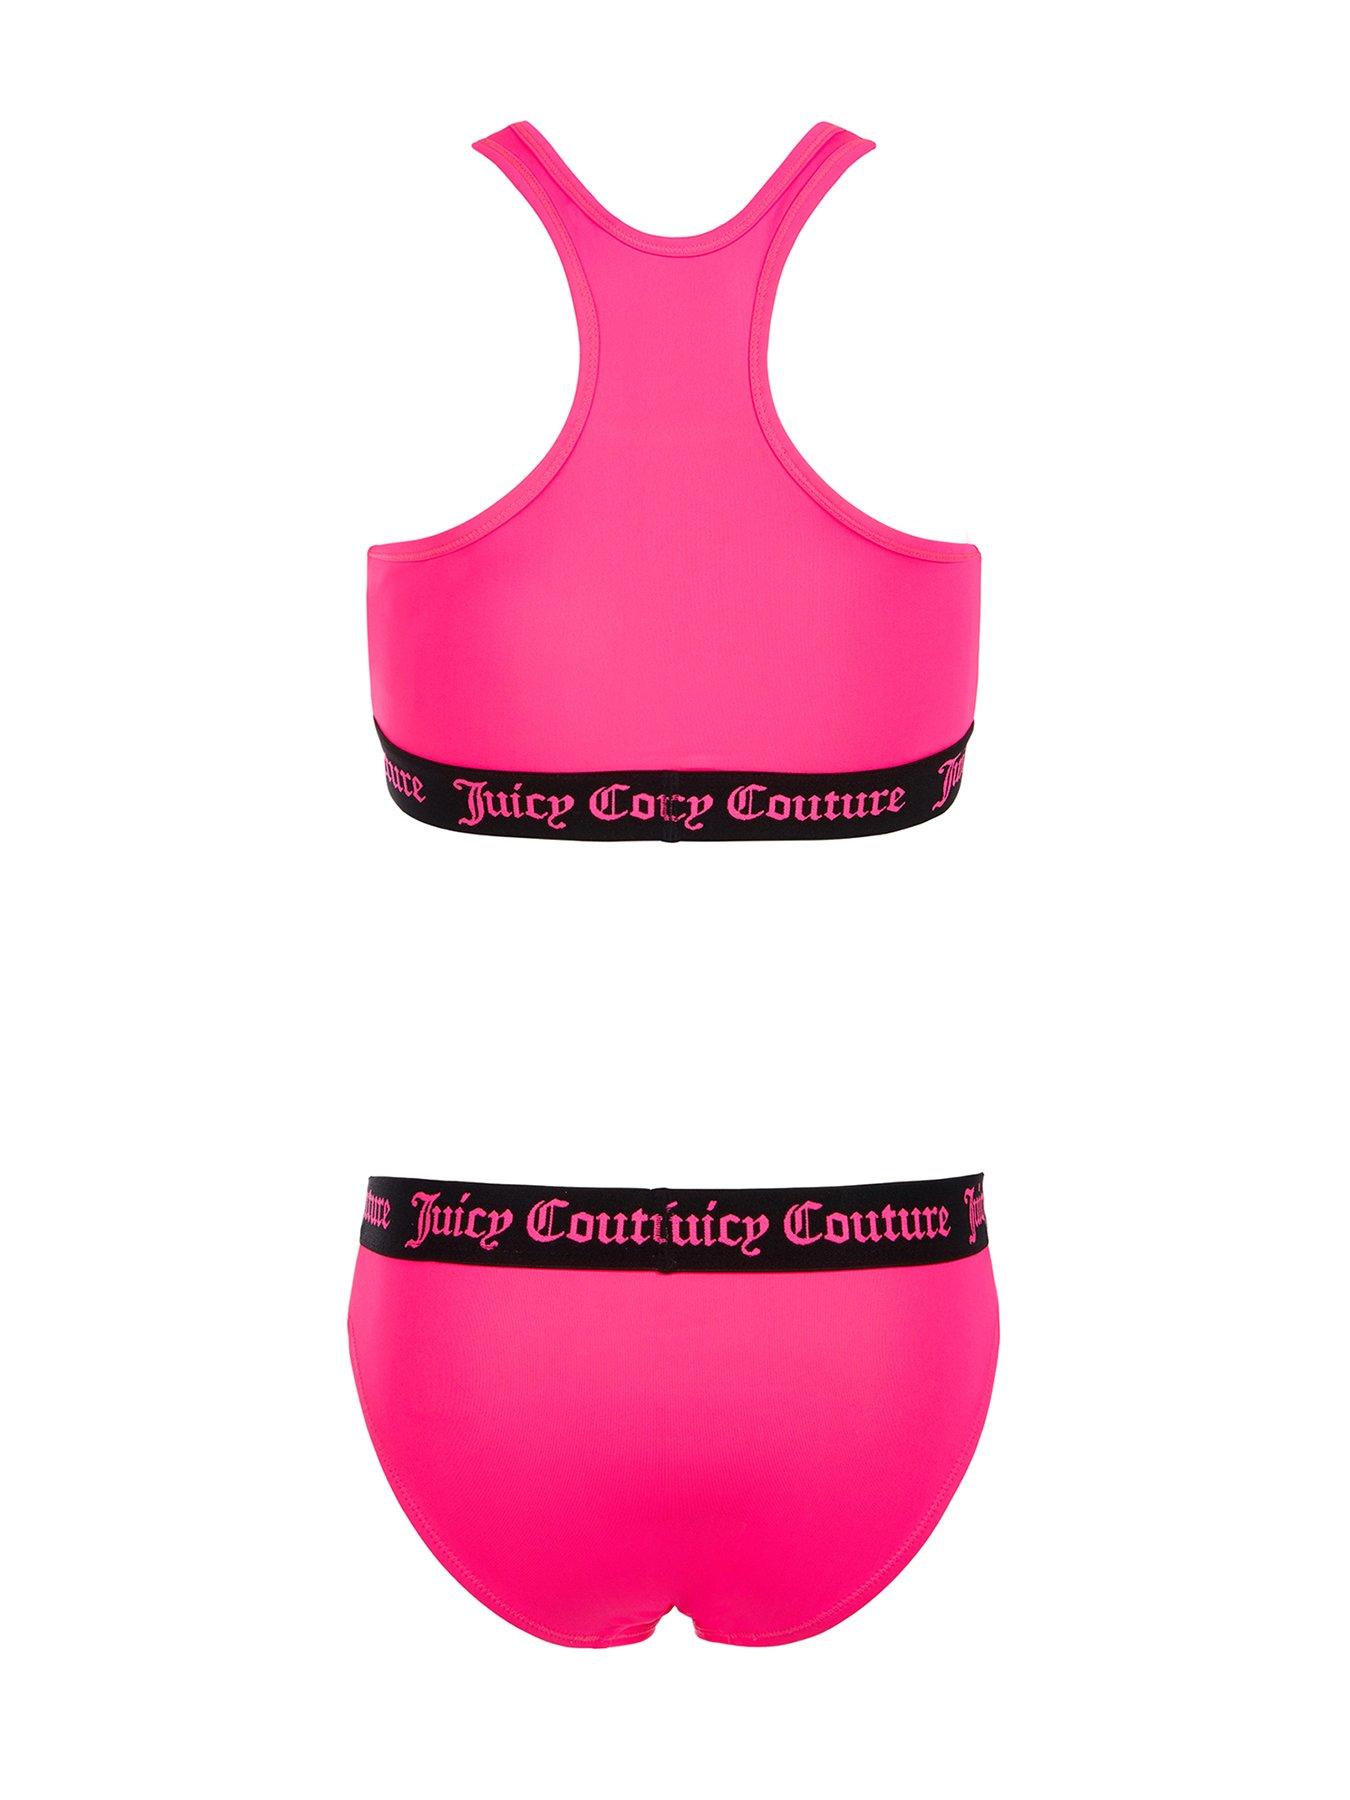 Juicy Couture, Intimates & Sleepwear, Juicy Couture Crossback Sports Bra  Black Juicy Print Size Small